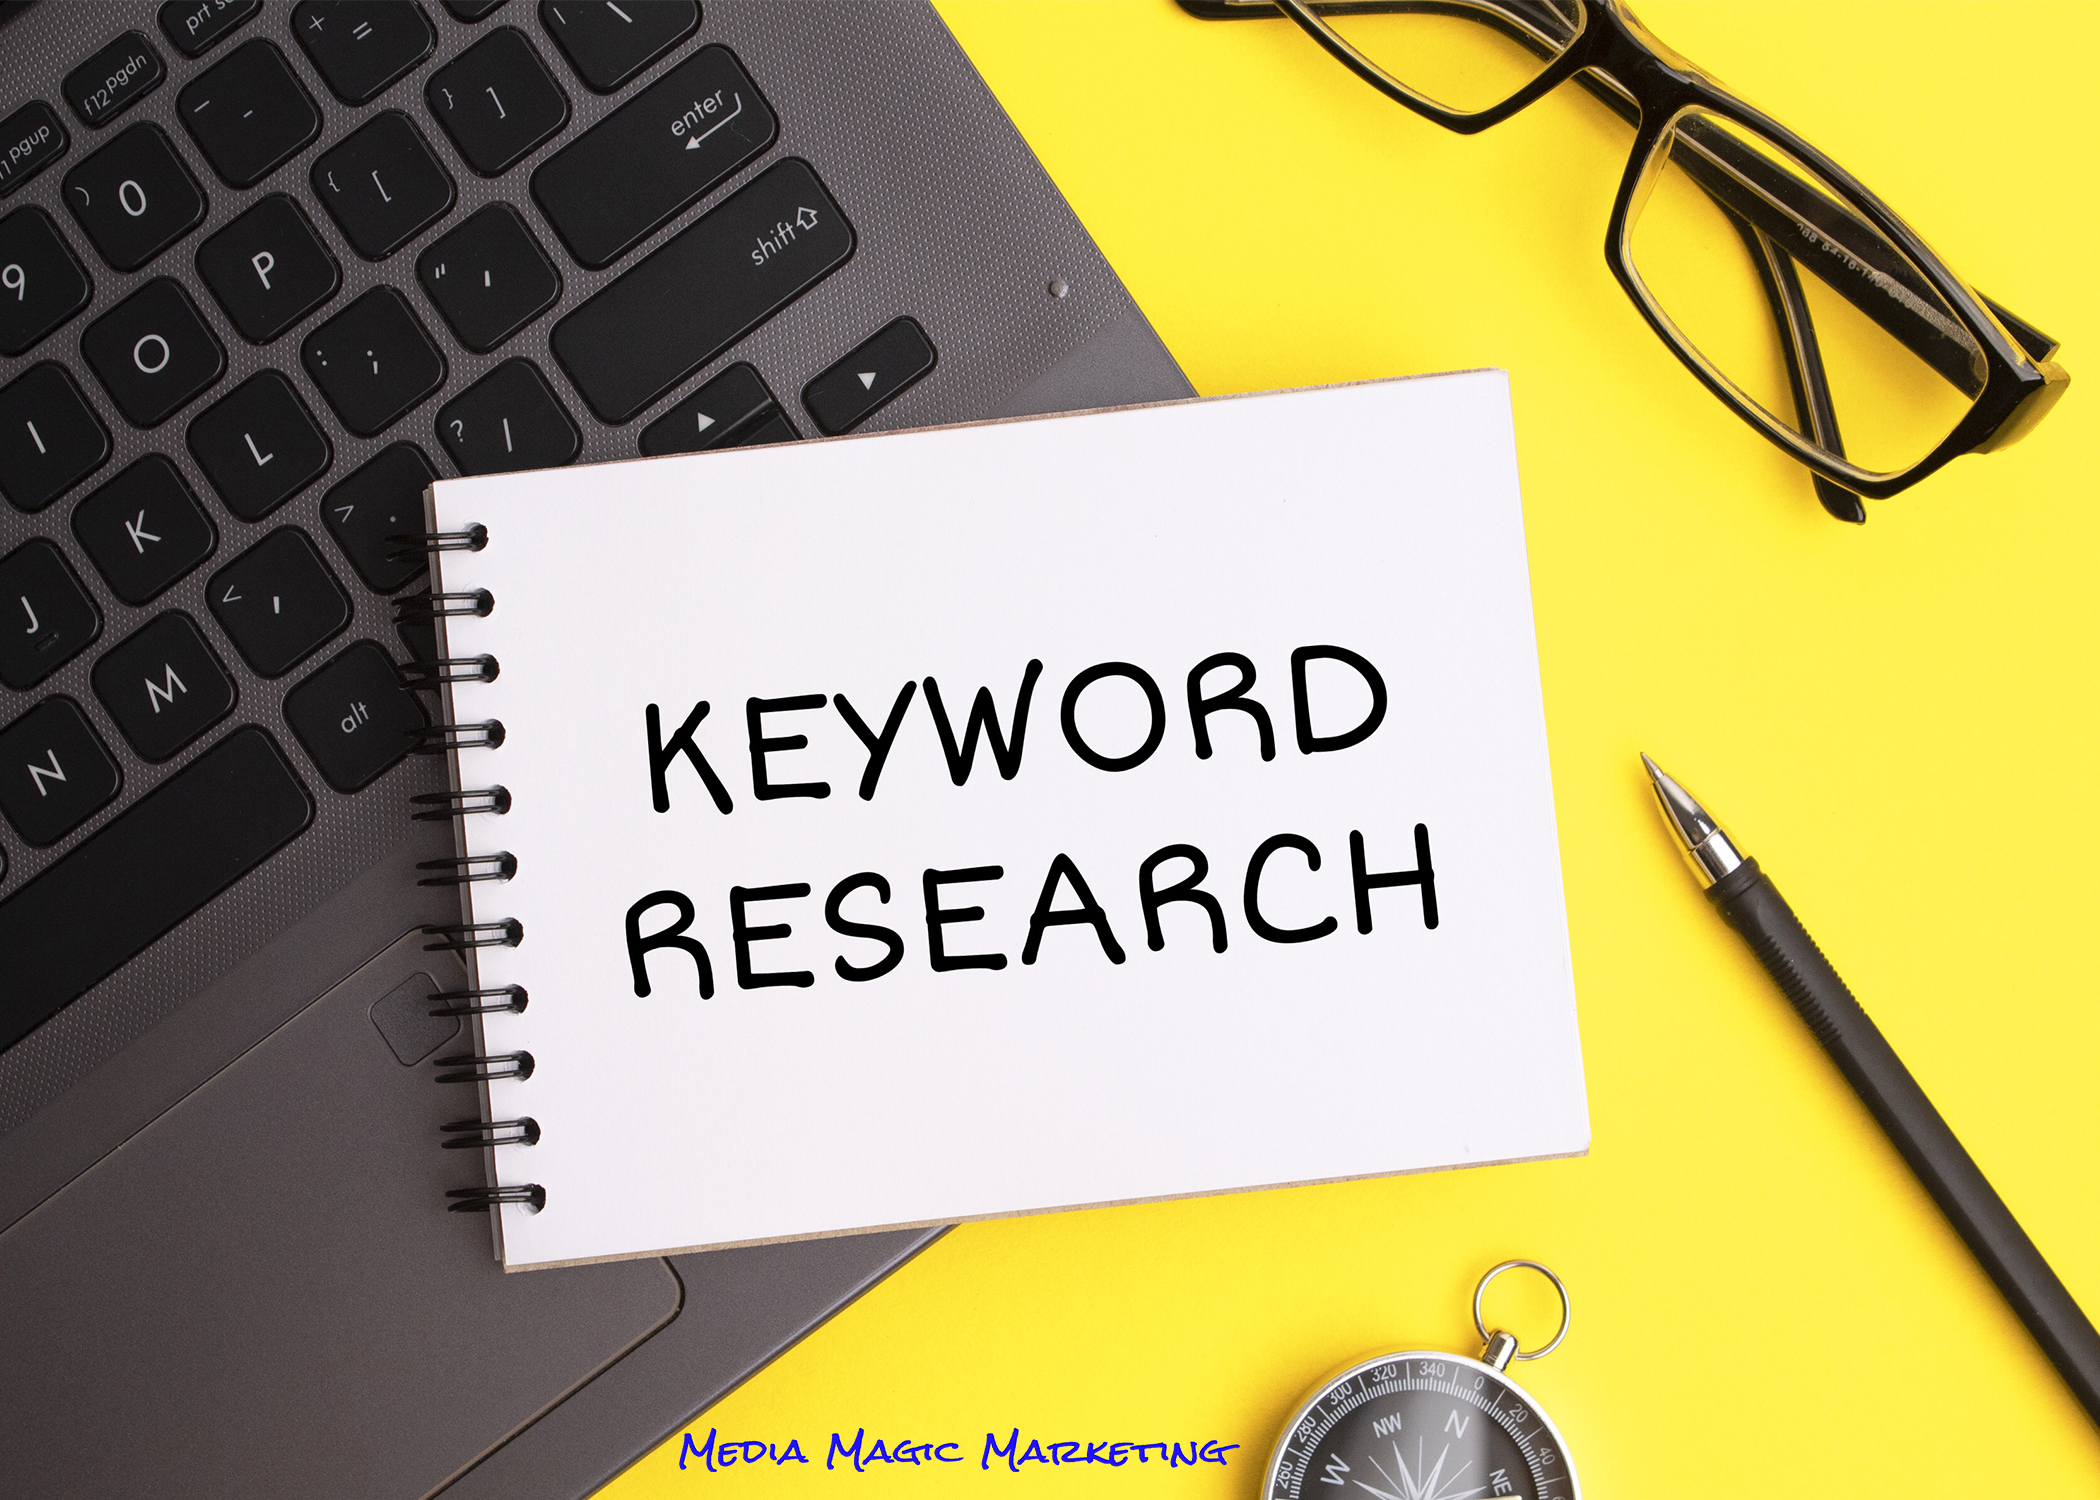 Why Businesses Should Hire an Internet Marketing Agency for Keyword Research